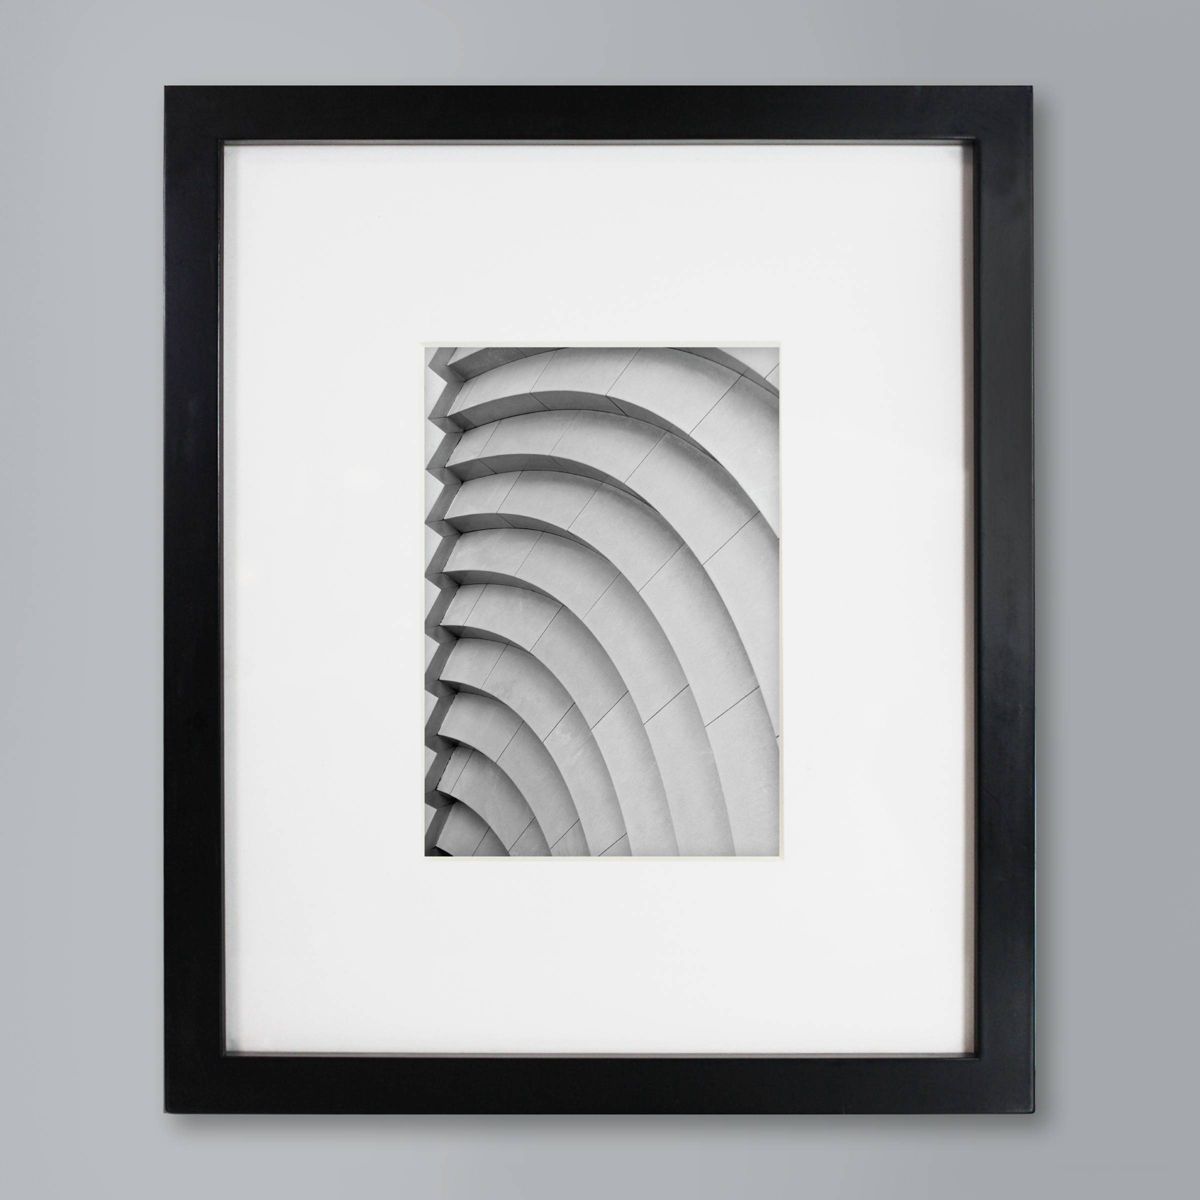 10" x 12" Matted to 5" x 7" Thin Gallery Frame - Threshold™ | Target